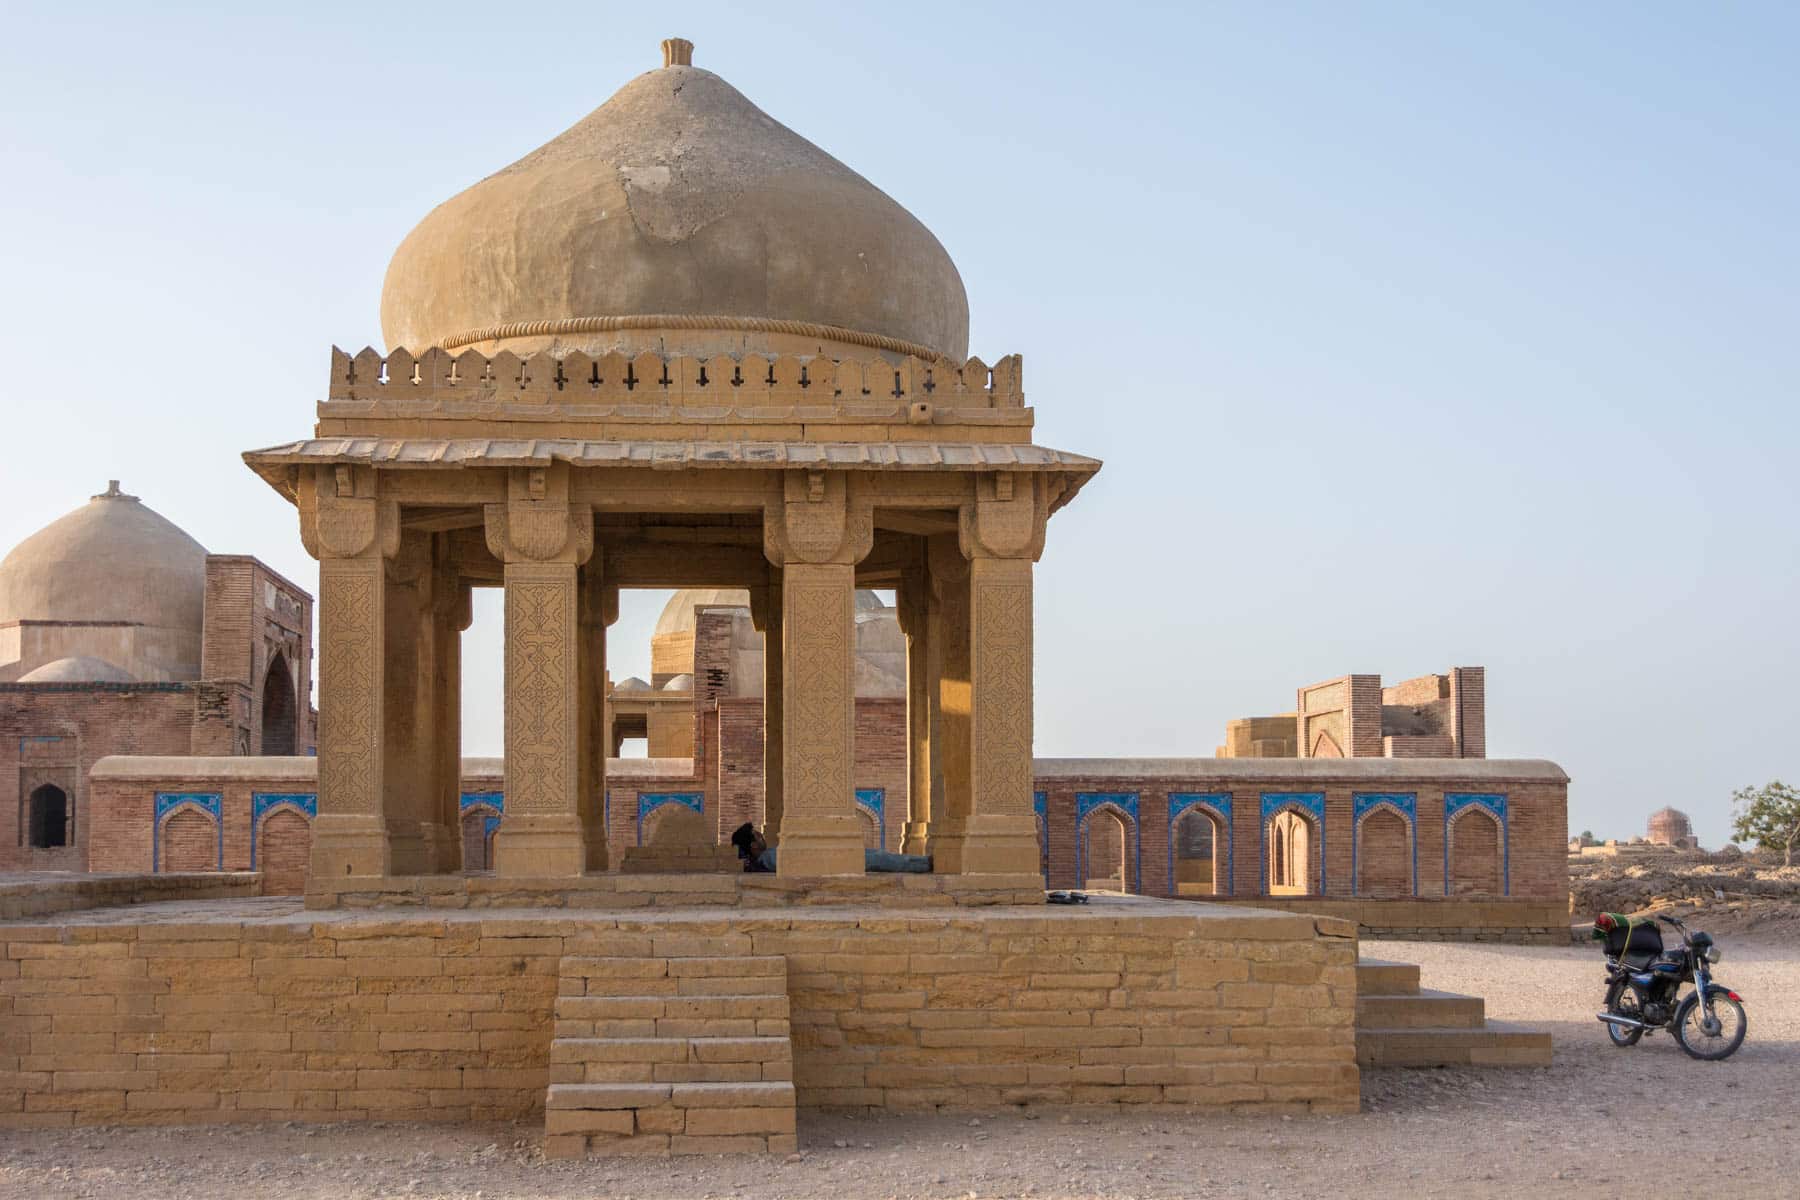 Sindh travel guide - Tomb at Makli Hill Necropolis - Lost With Purpose travel blog